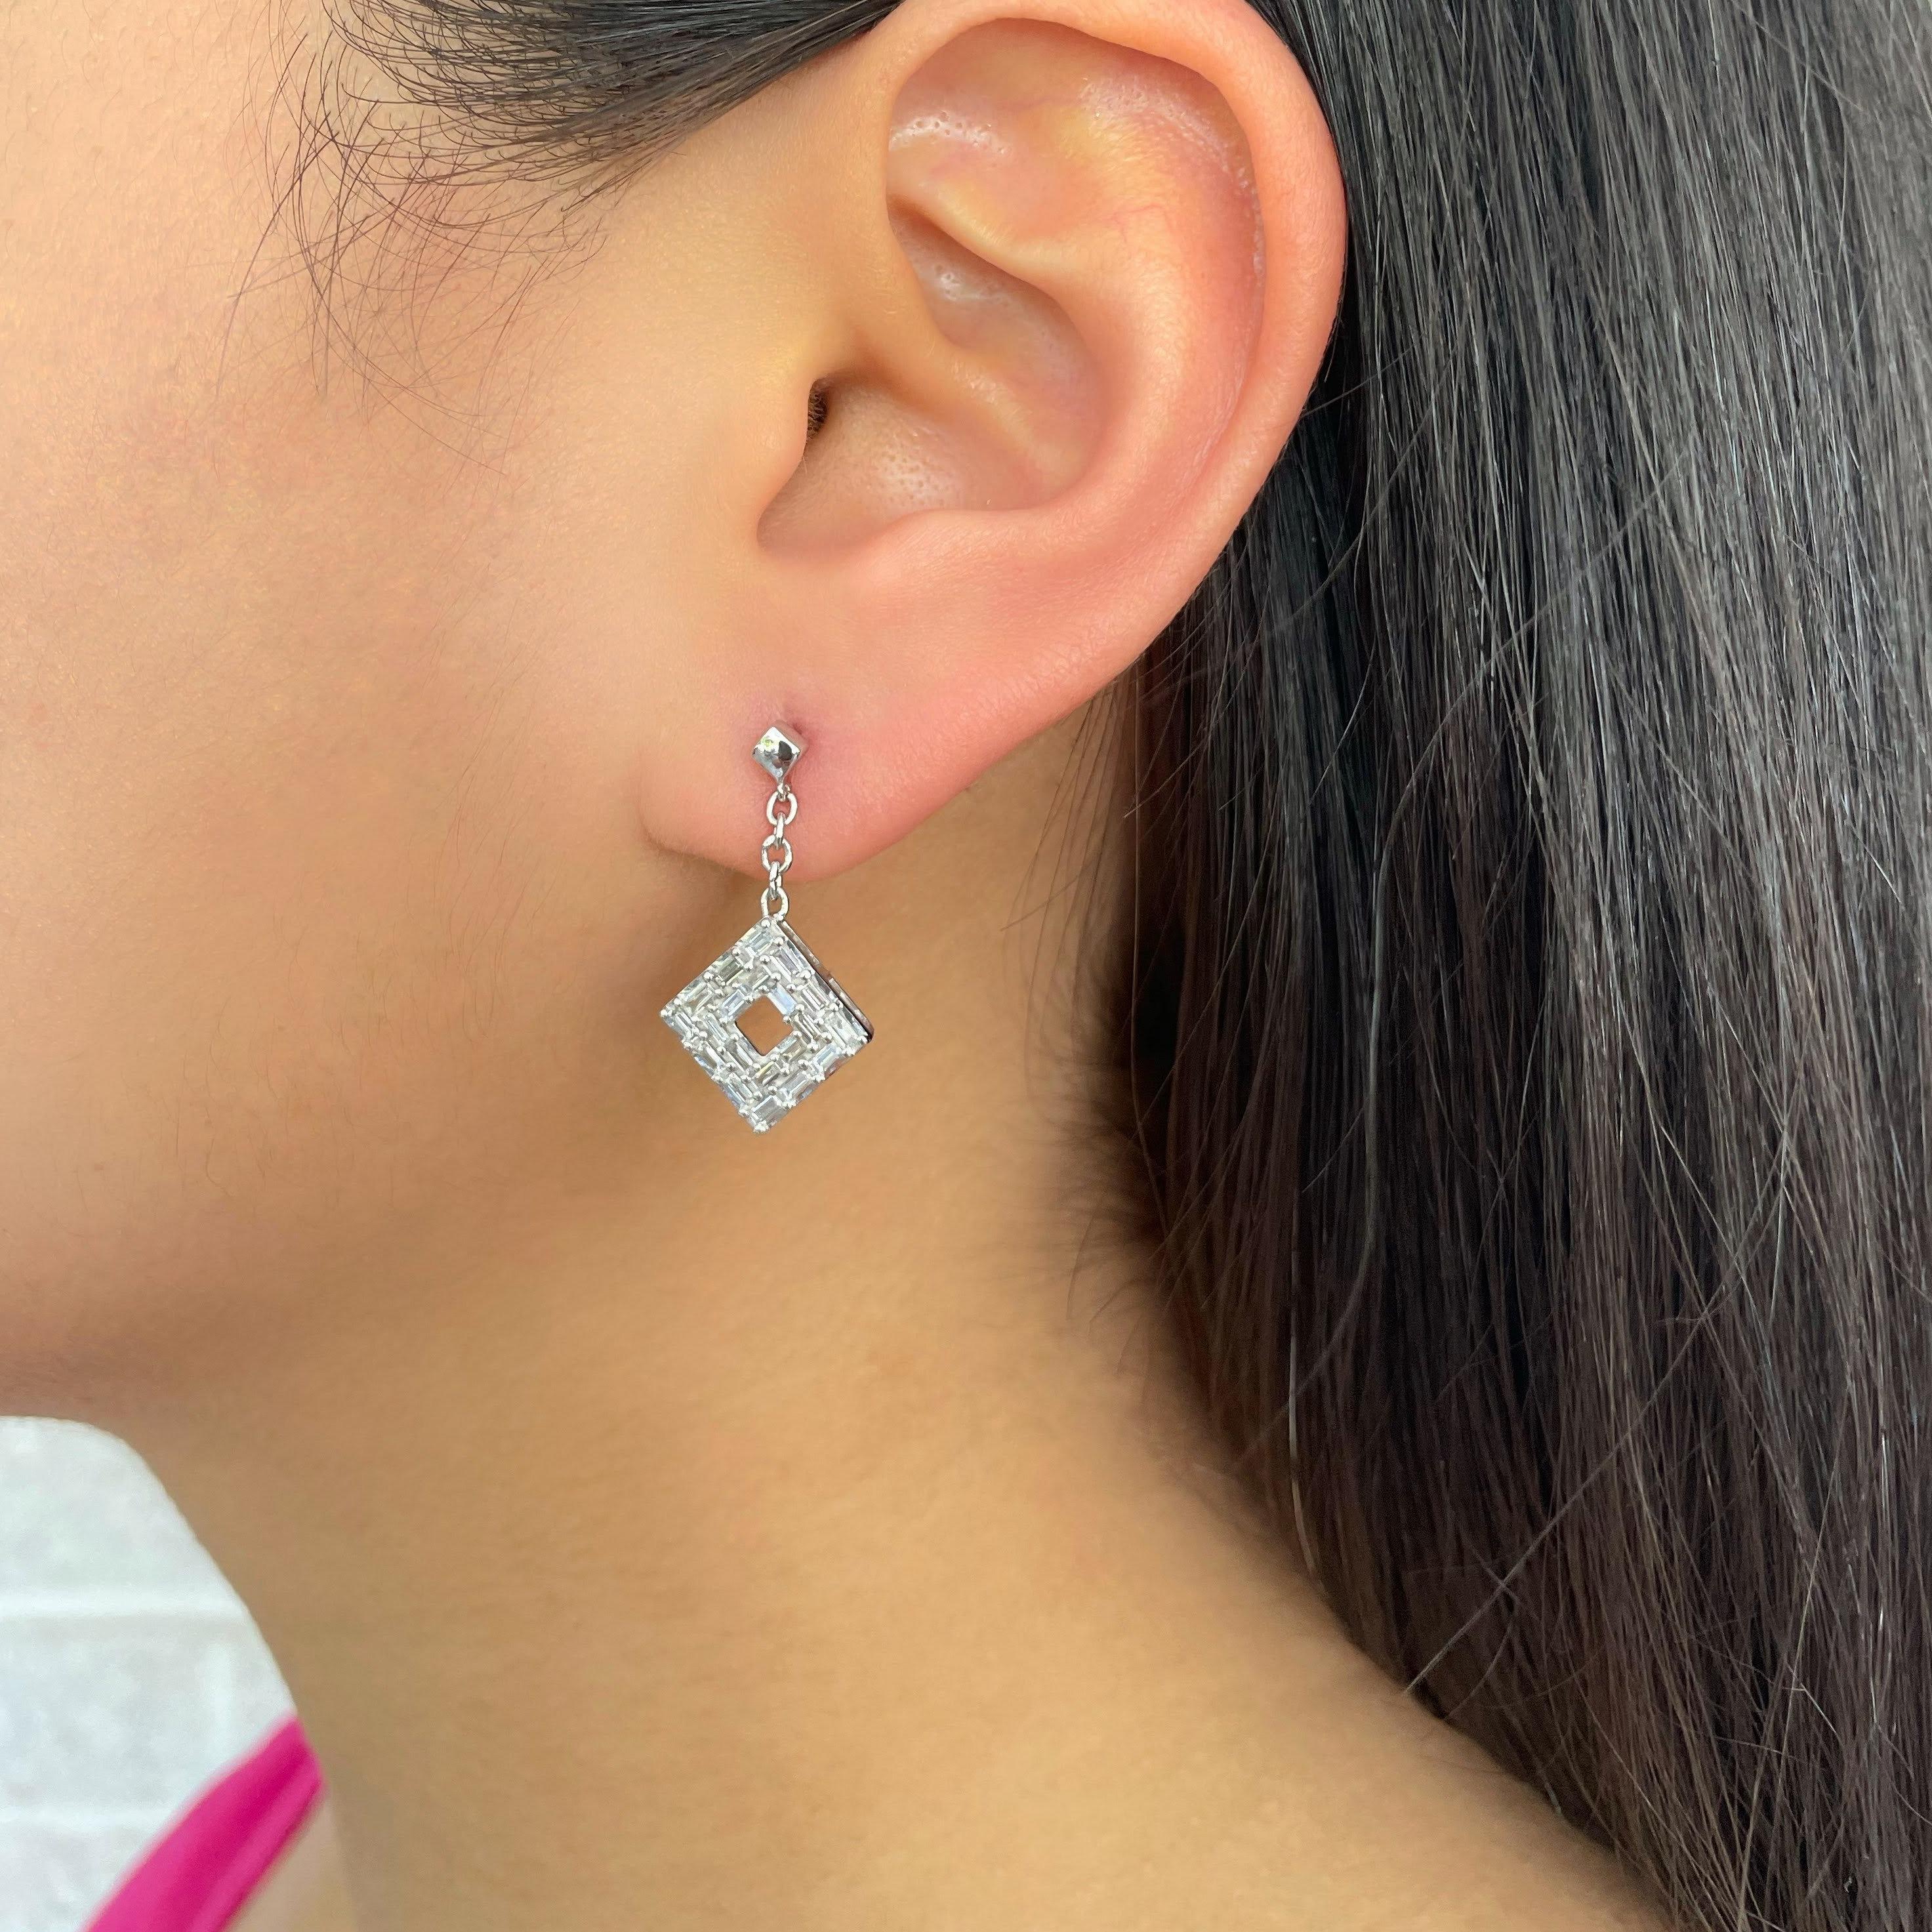 The 14K white gold dangling earrings feature solely baguette diamonds that give it a profound look but the delicate dangle is subtle enough for an everyday wear. Because of its universal style, these earrings are perfect for any occasion including